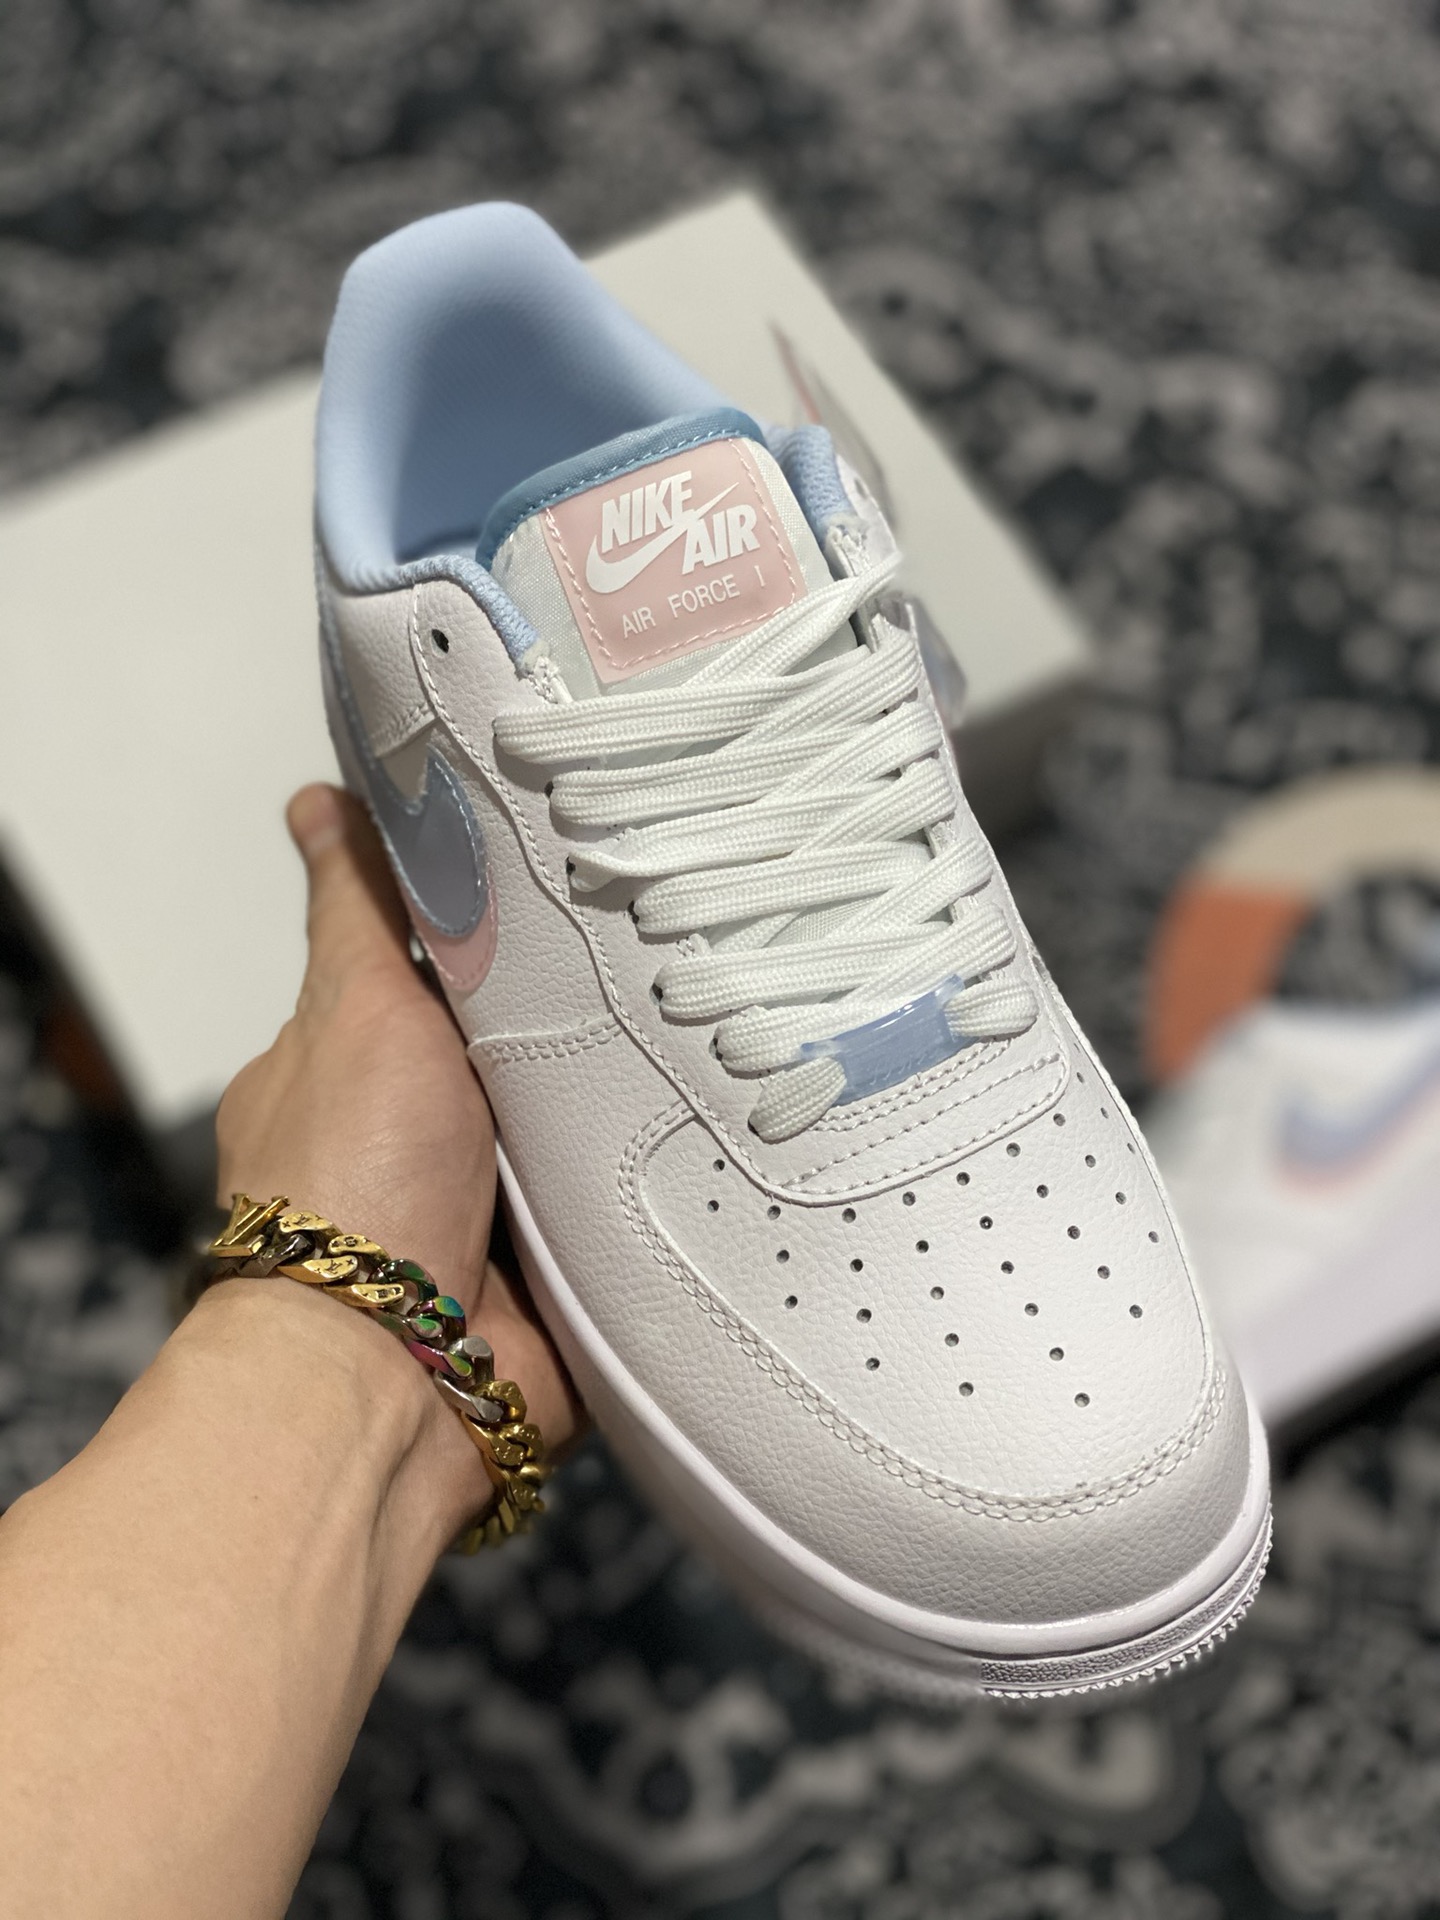 Nike Air Force 1 Low ‘Double Swoosh’ White/Light Armory BlueArctic Punch For Sale Sneaker Hello